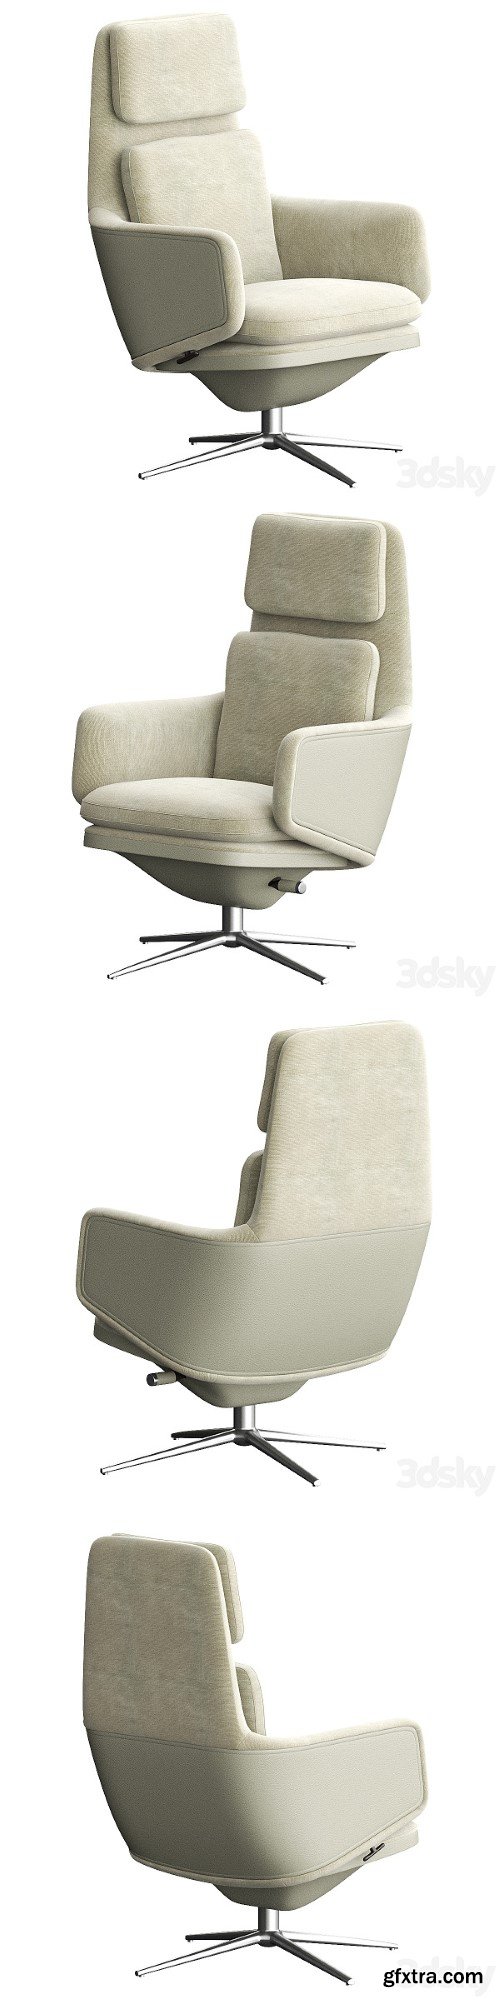 GRAND RELAX Fabric Armchair By Vitra